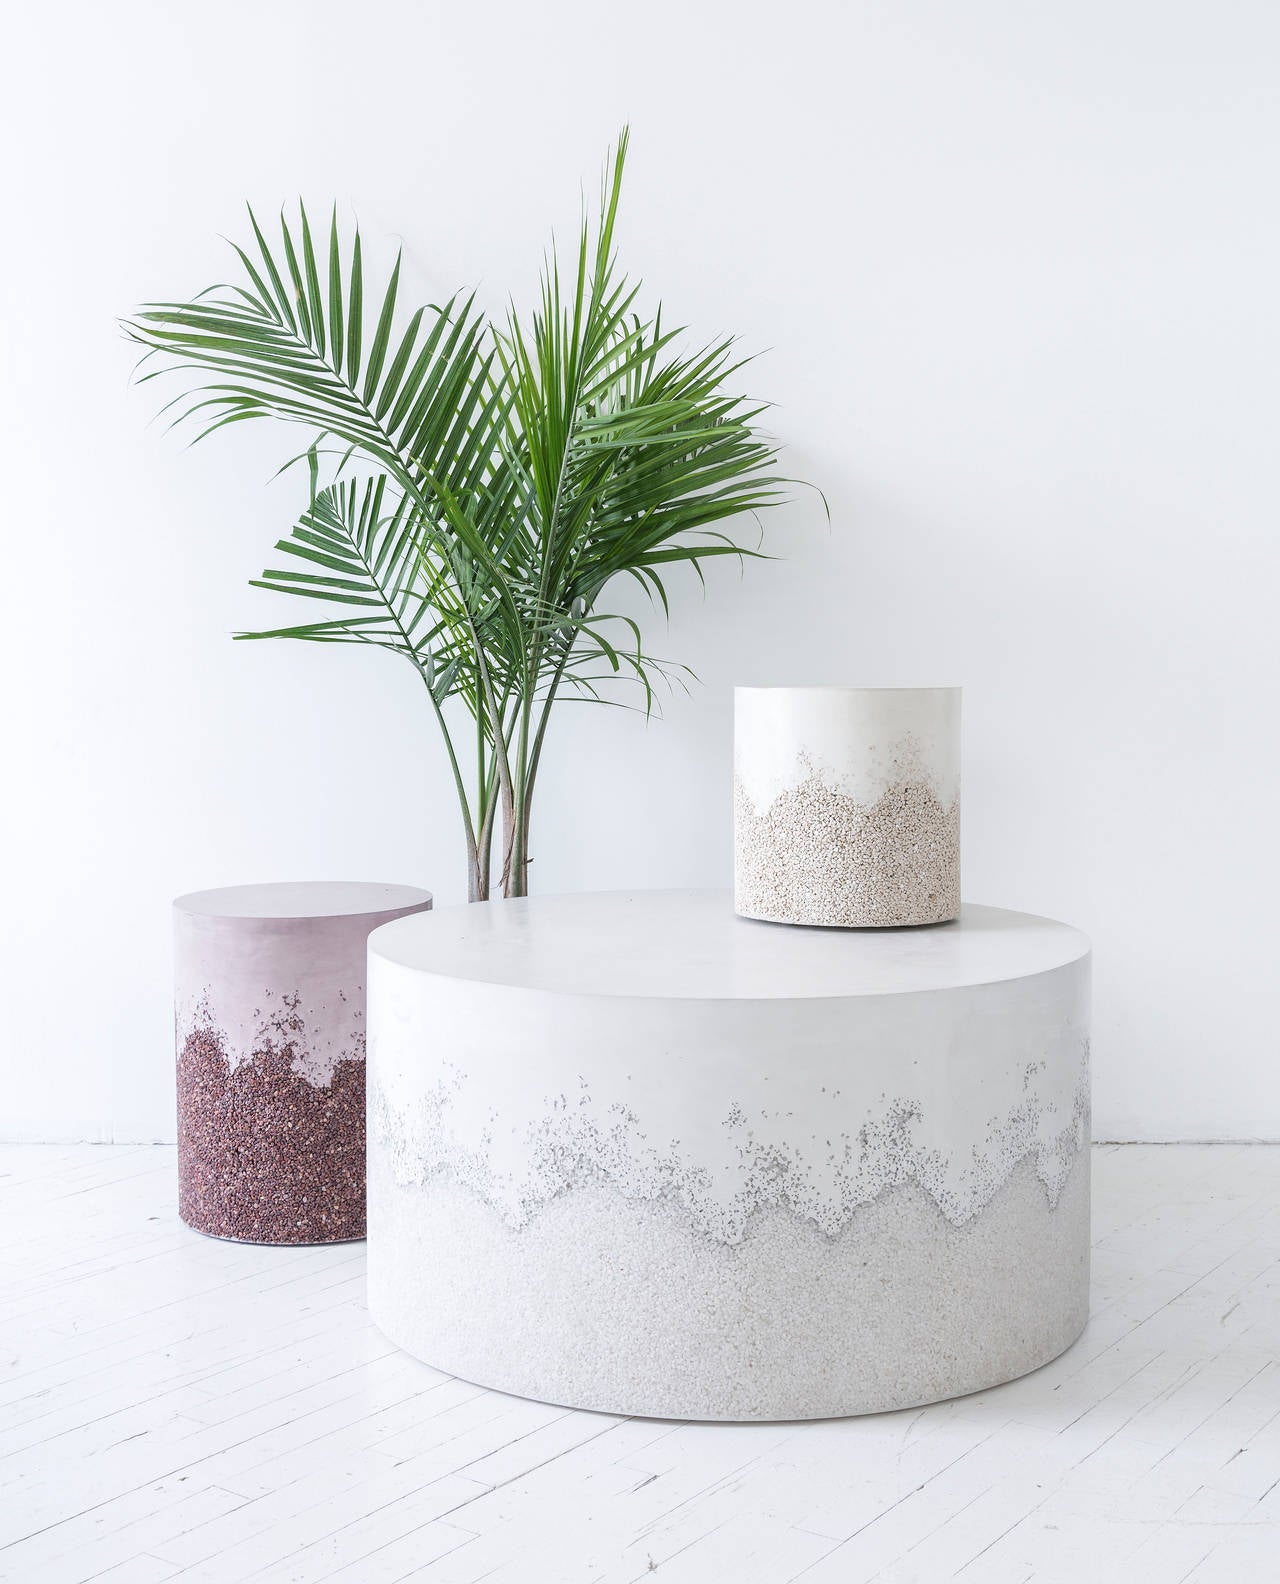 This drum coffee table consists of a hand-dyed white cement top and a packed quartz bottom. The cement is poured by hand over the crushed quartz, creating an organic barrier between the two materials. The piece has a hollow cavity and weighs